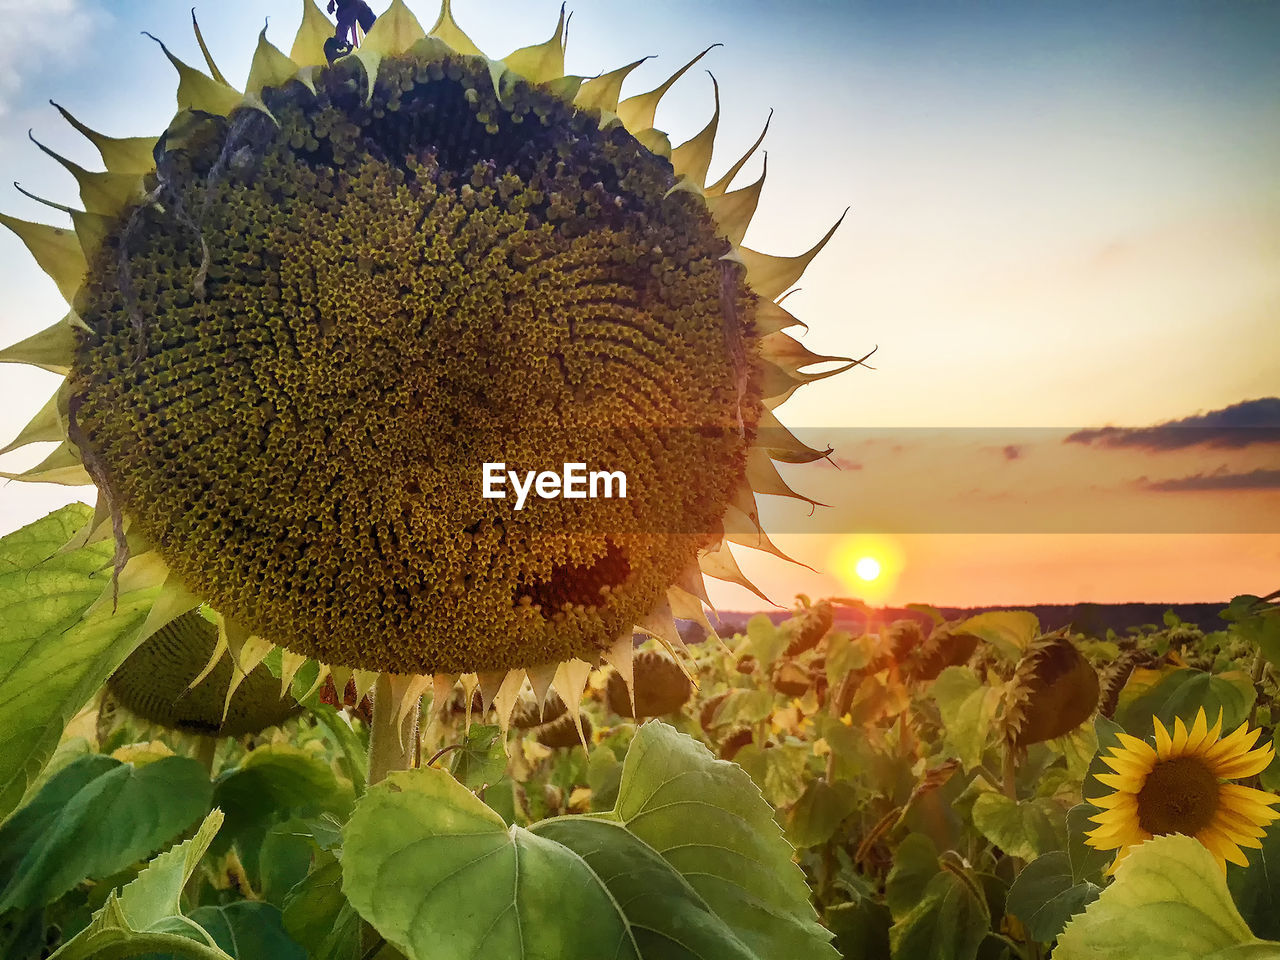 CLOSE-UP OF SUNFLOWER IN FIELD